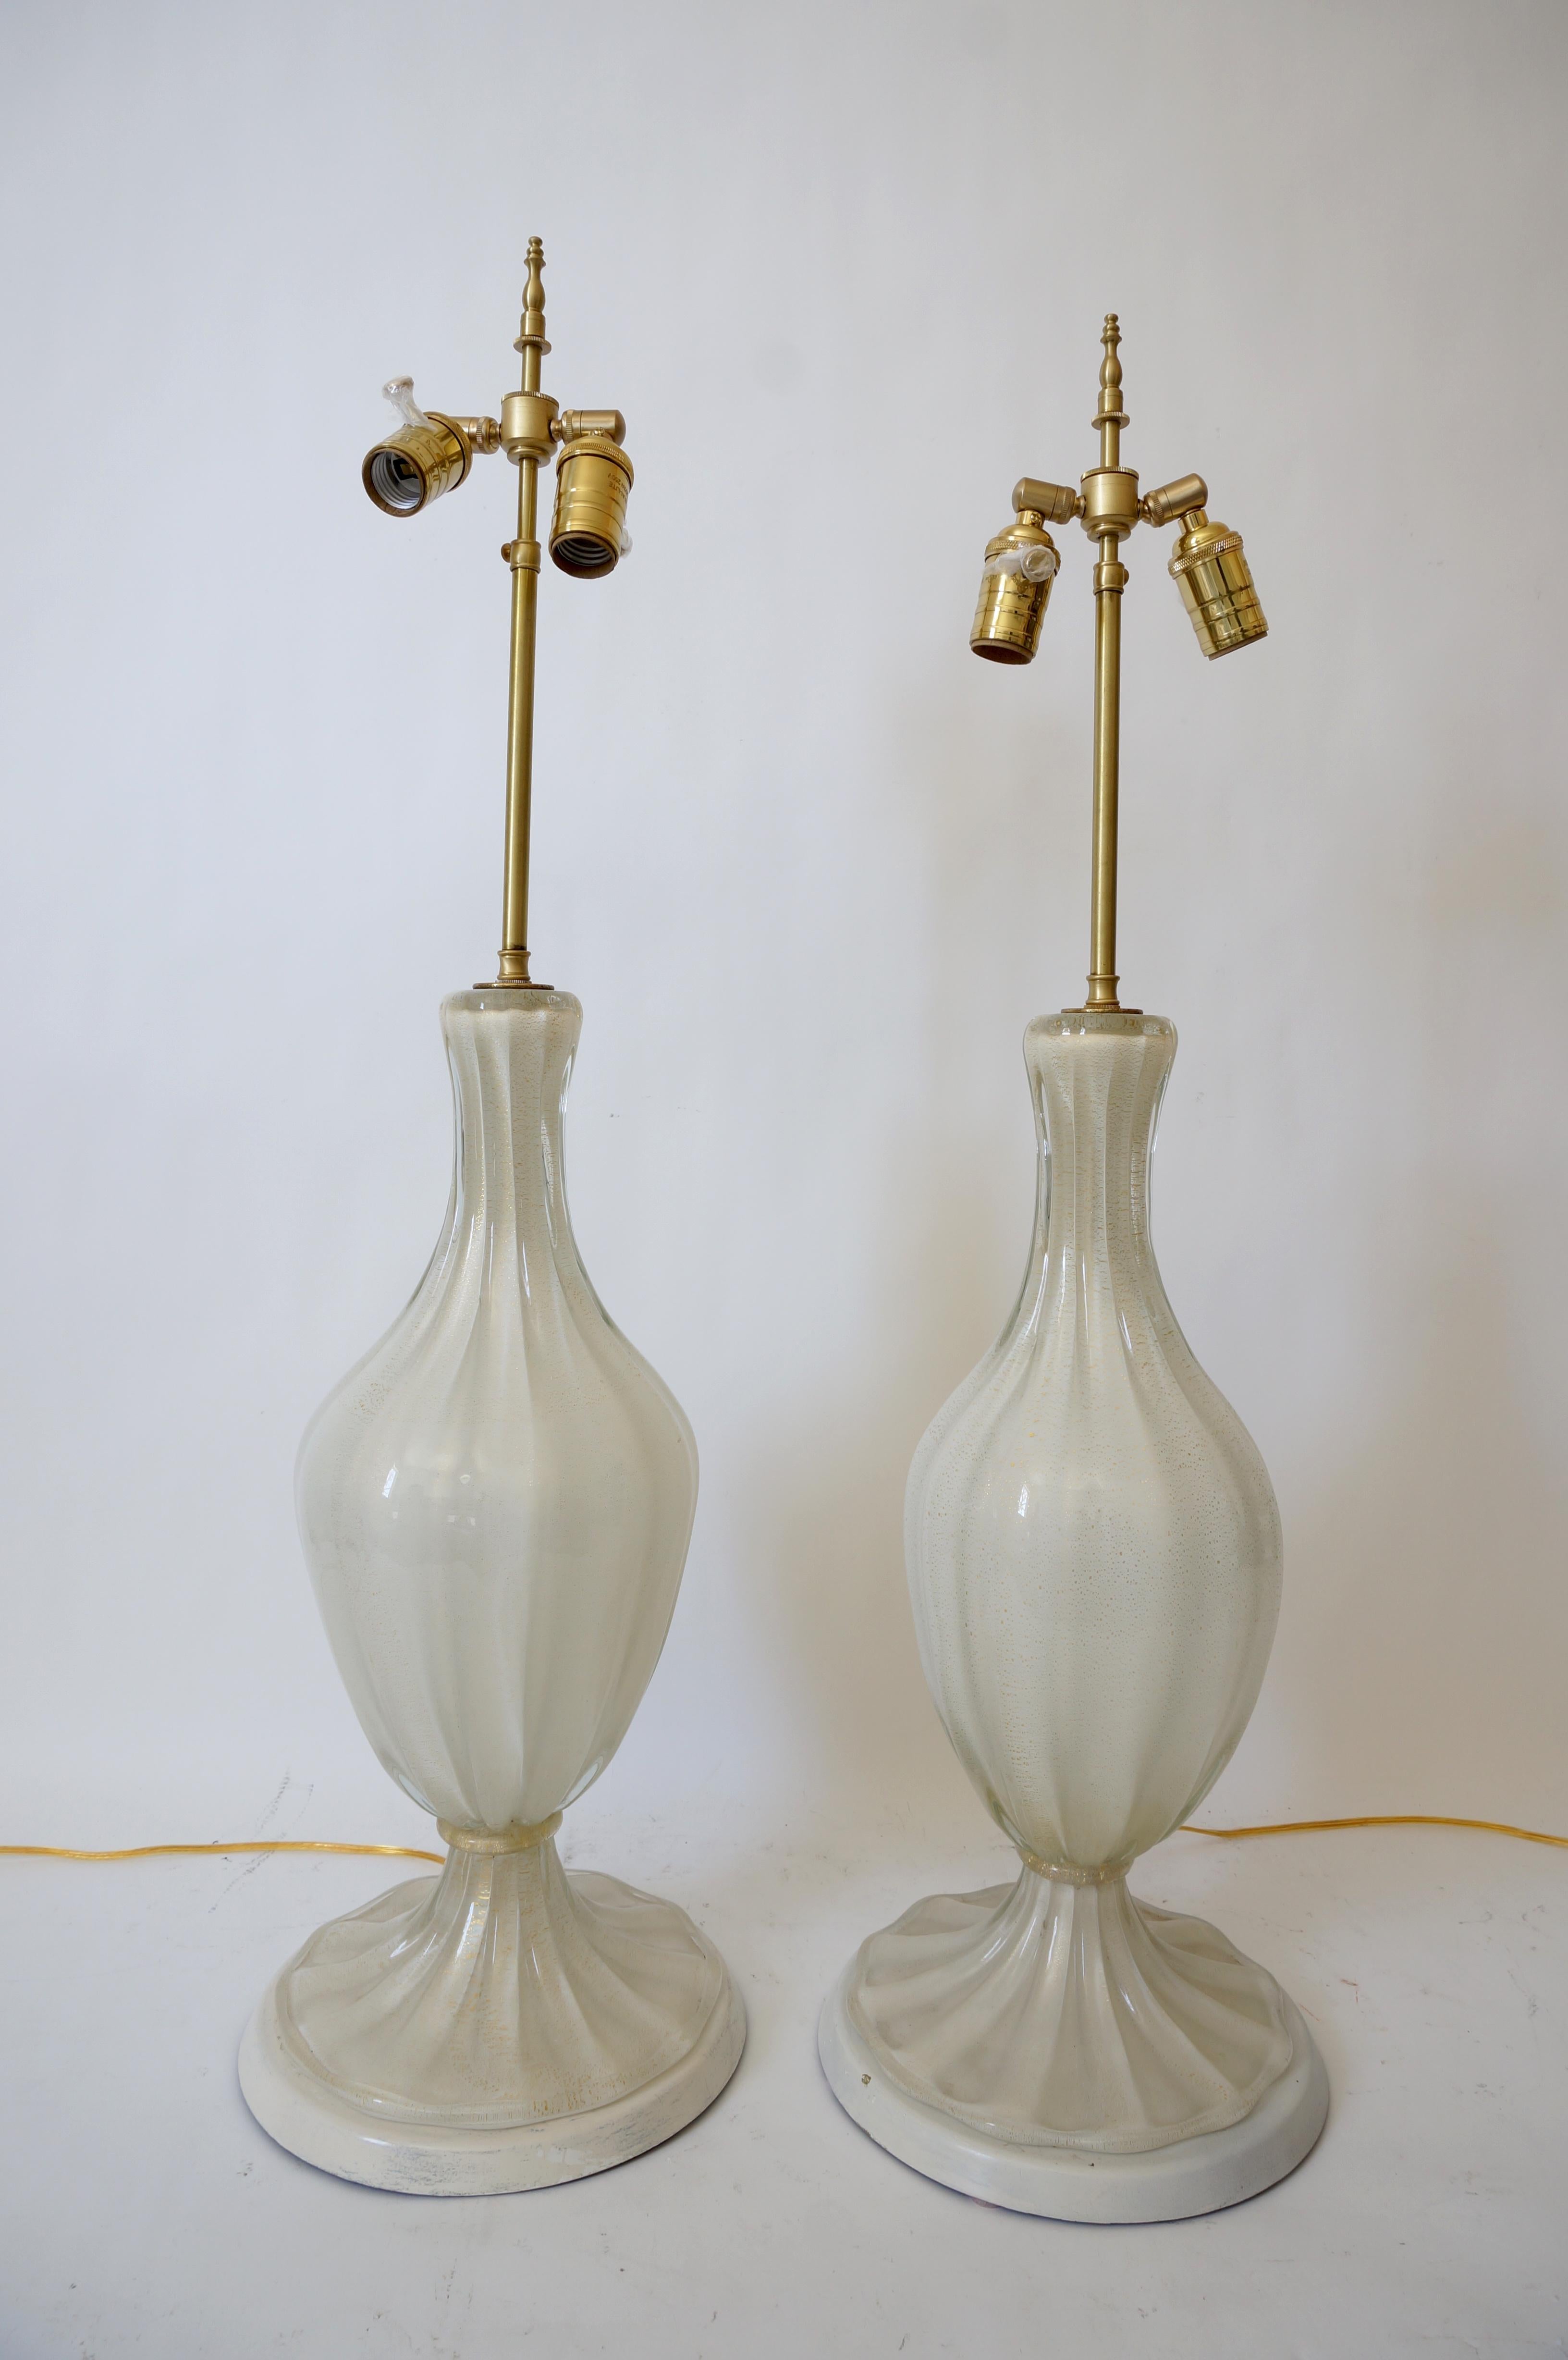 This large scale, stylish and chic pair of Murano glass lamps date to the 1950s-1960s and were created by the iconic workroom of Barovier et Toso. 

Note: Dimension of the Murano sections are 21